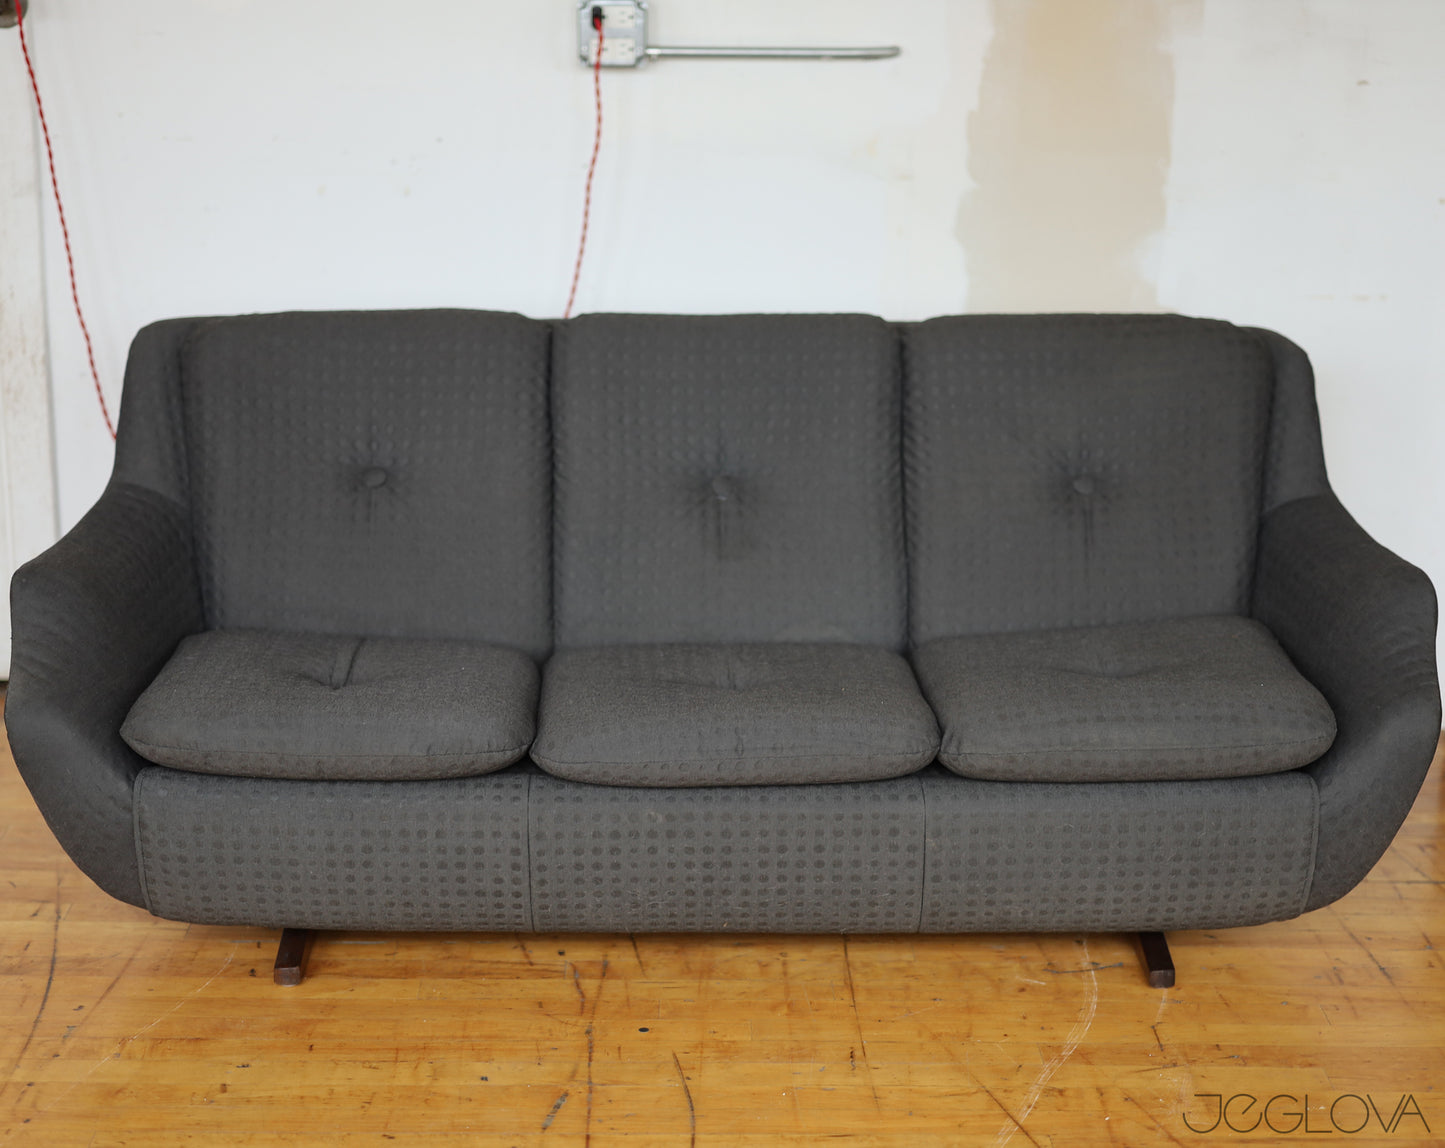 mid-century modern sofa P.K. 1028 by Parker-Knoll, made in England